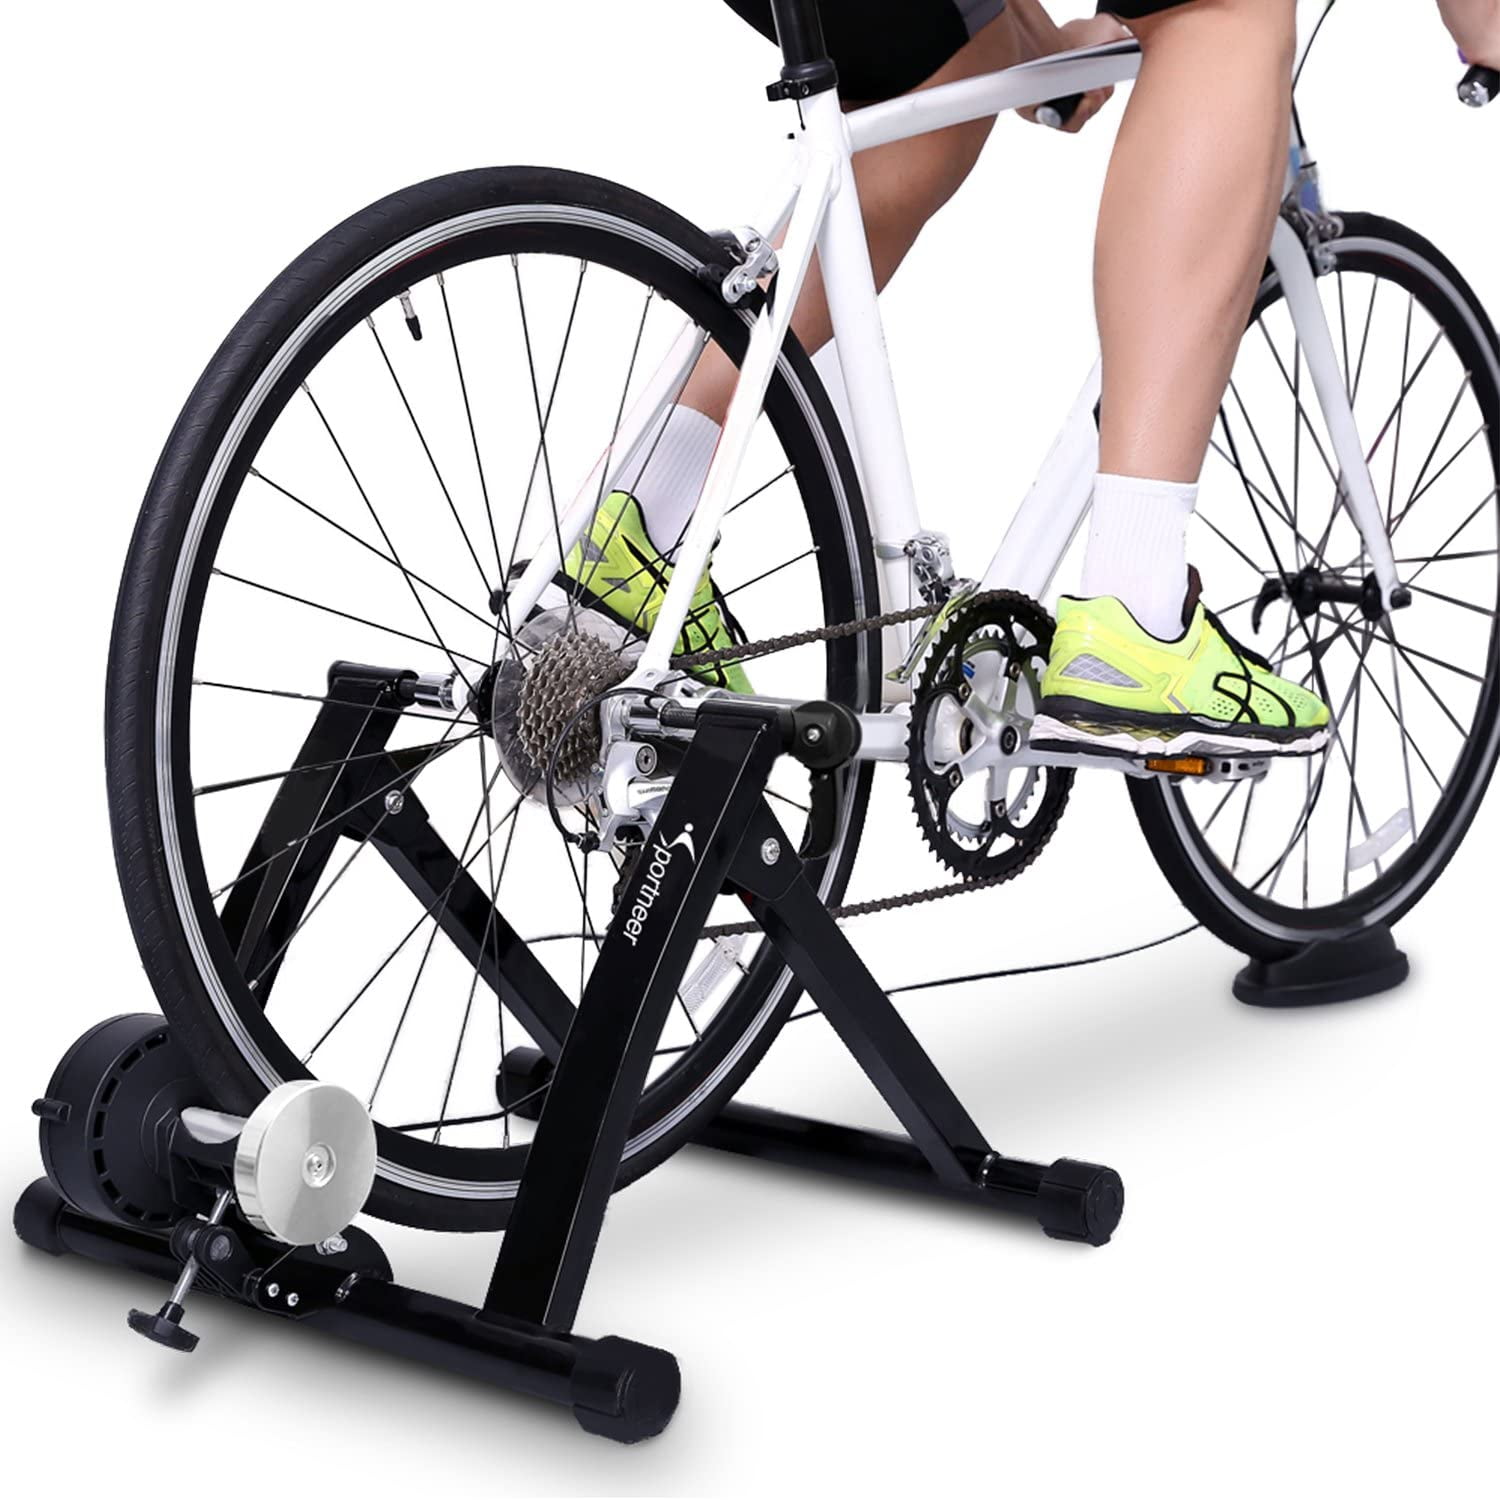 Bike Trainer Stand Indoor Exercise Sportneer Magnetic Bicycle Cycling Training Accessories with Noise Reduction Wheel Kit for Road Bike 